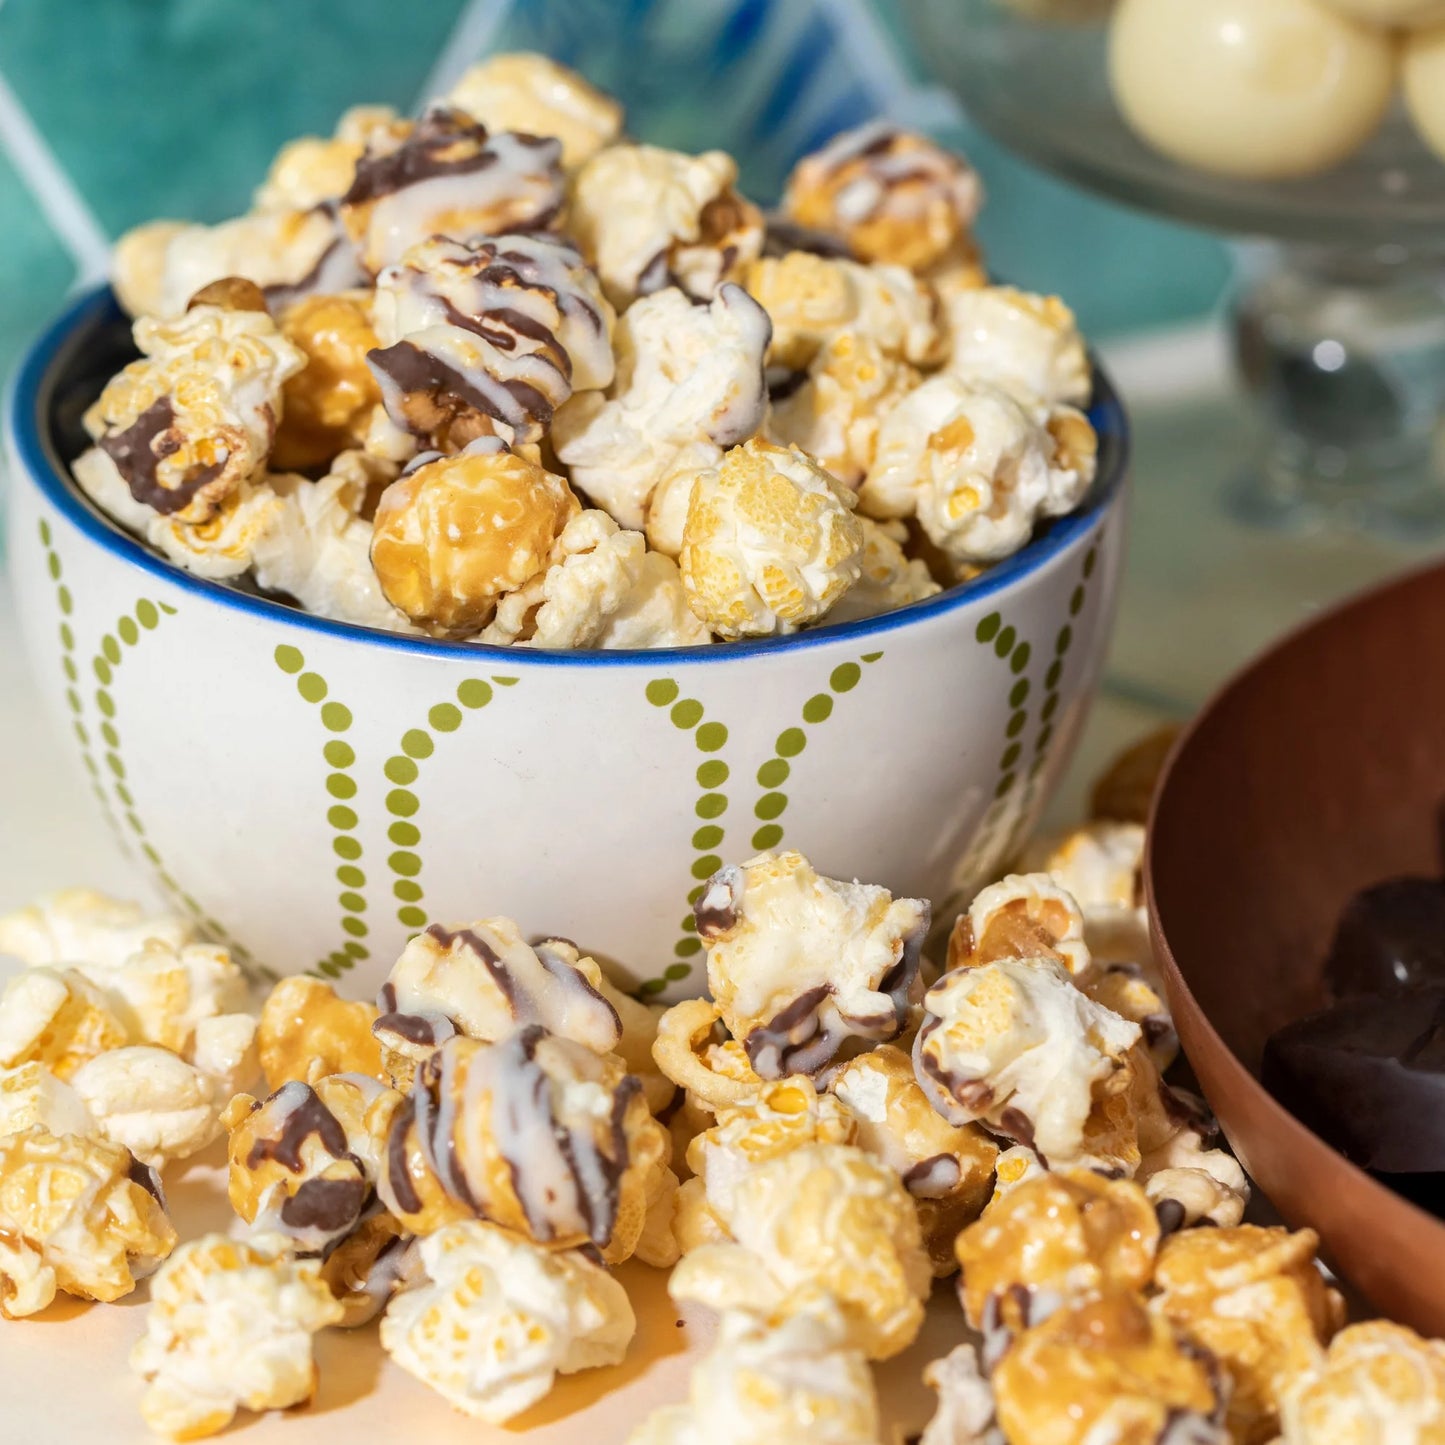 Double Drizzle Popcorn, Caramel & Kettle with Chocolatey Stripes, 7.5 Oz